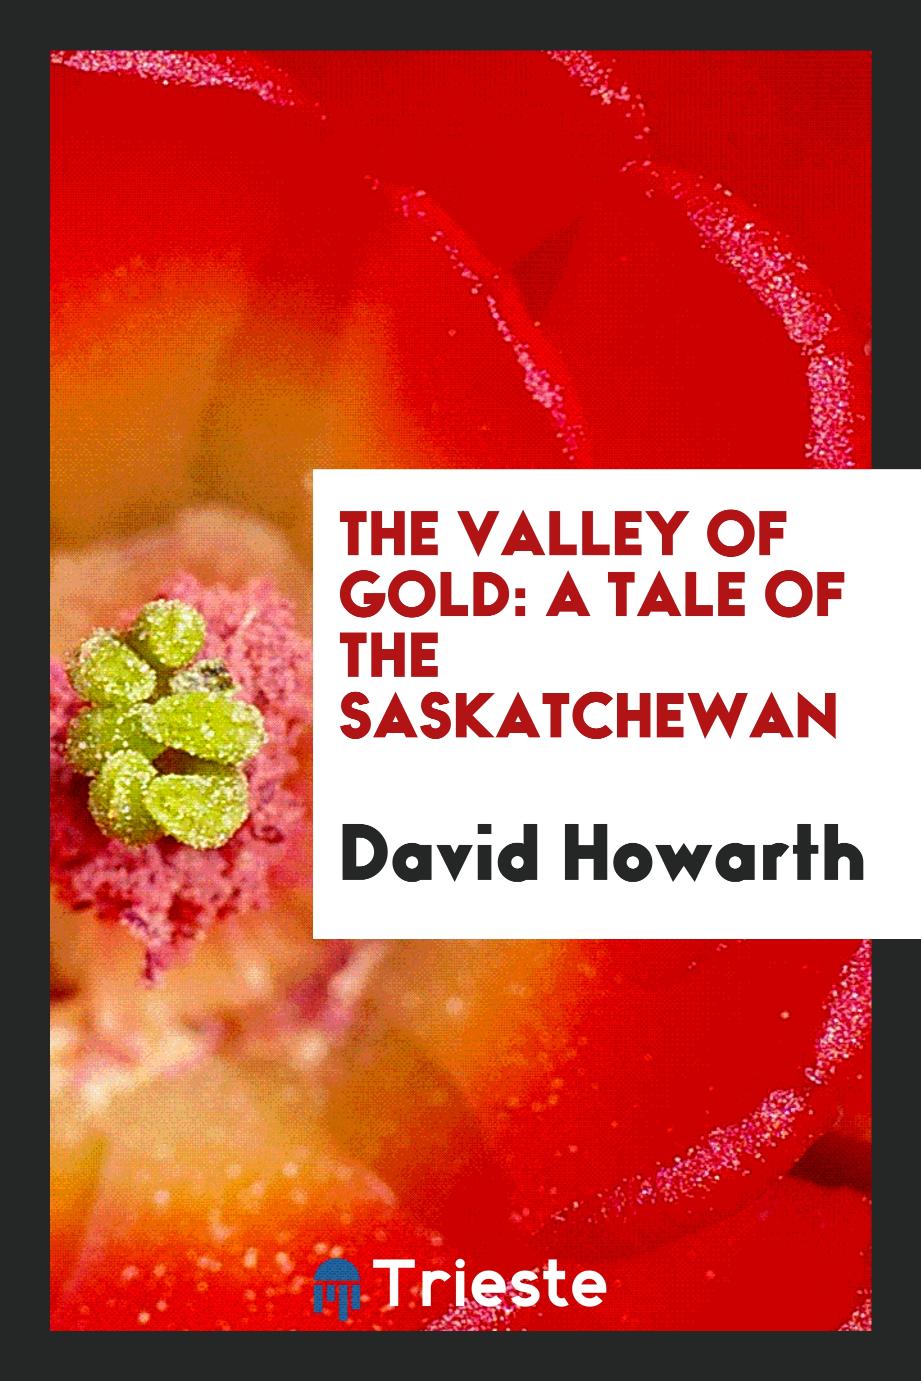 The valley of gold: a tale of the Saskatchewan